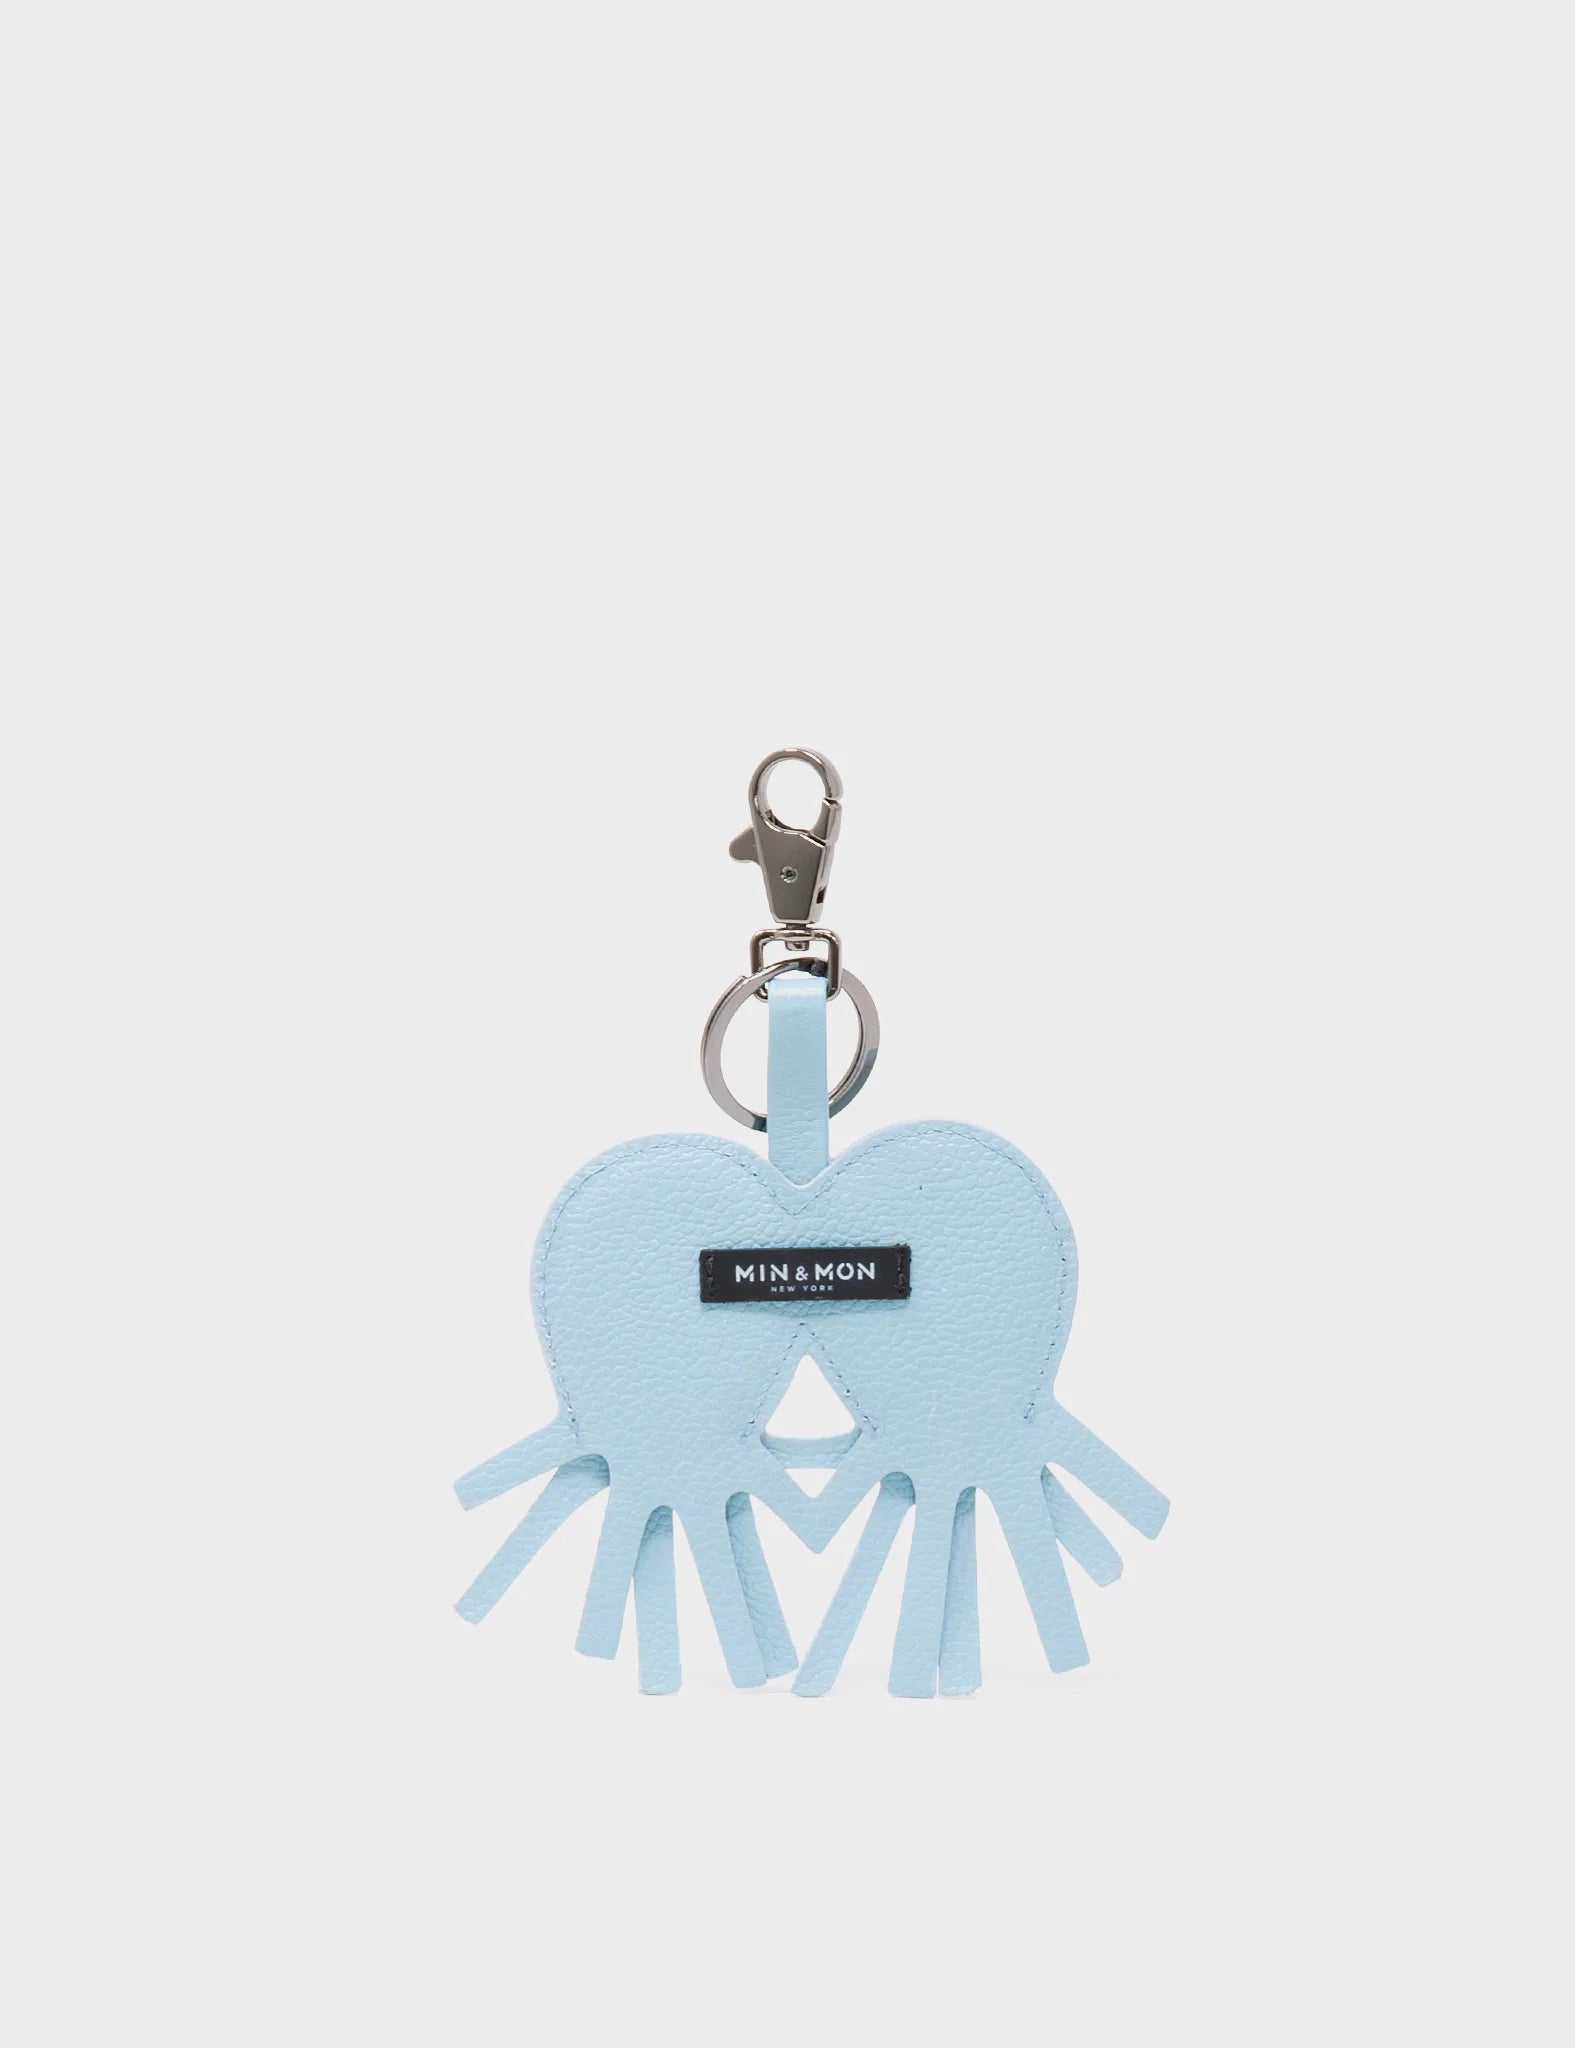 Octopus twins Charm - Stratosphere Blue Leather Keychain - Back 